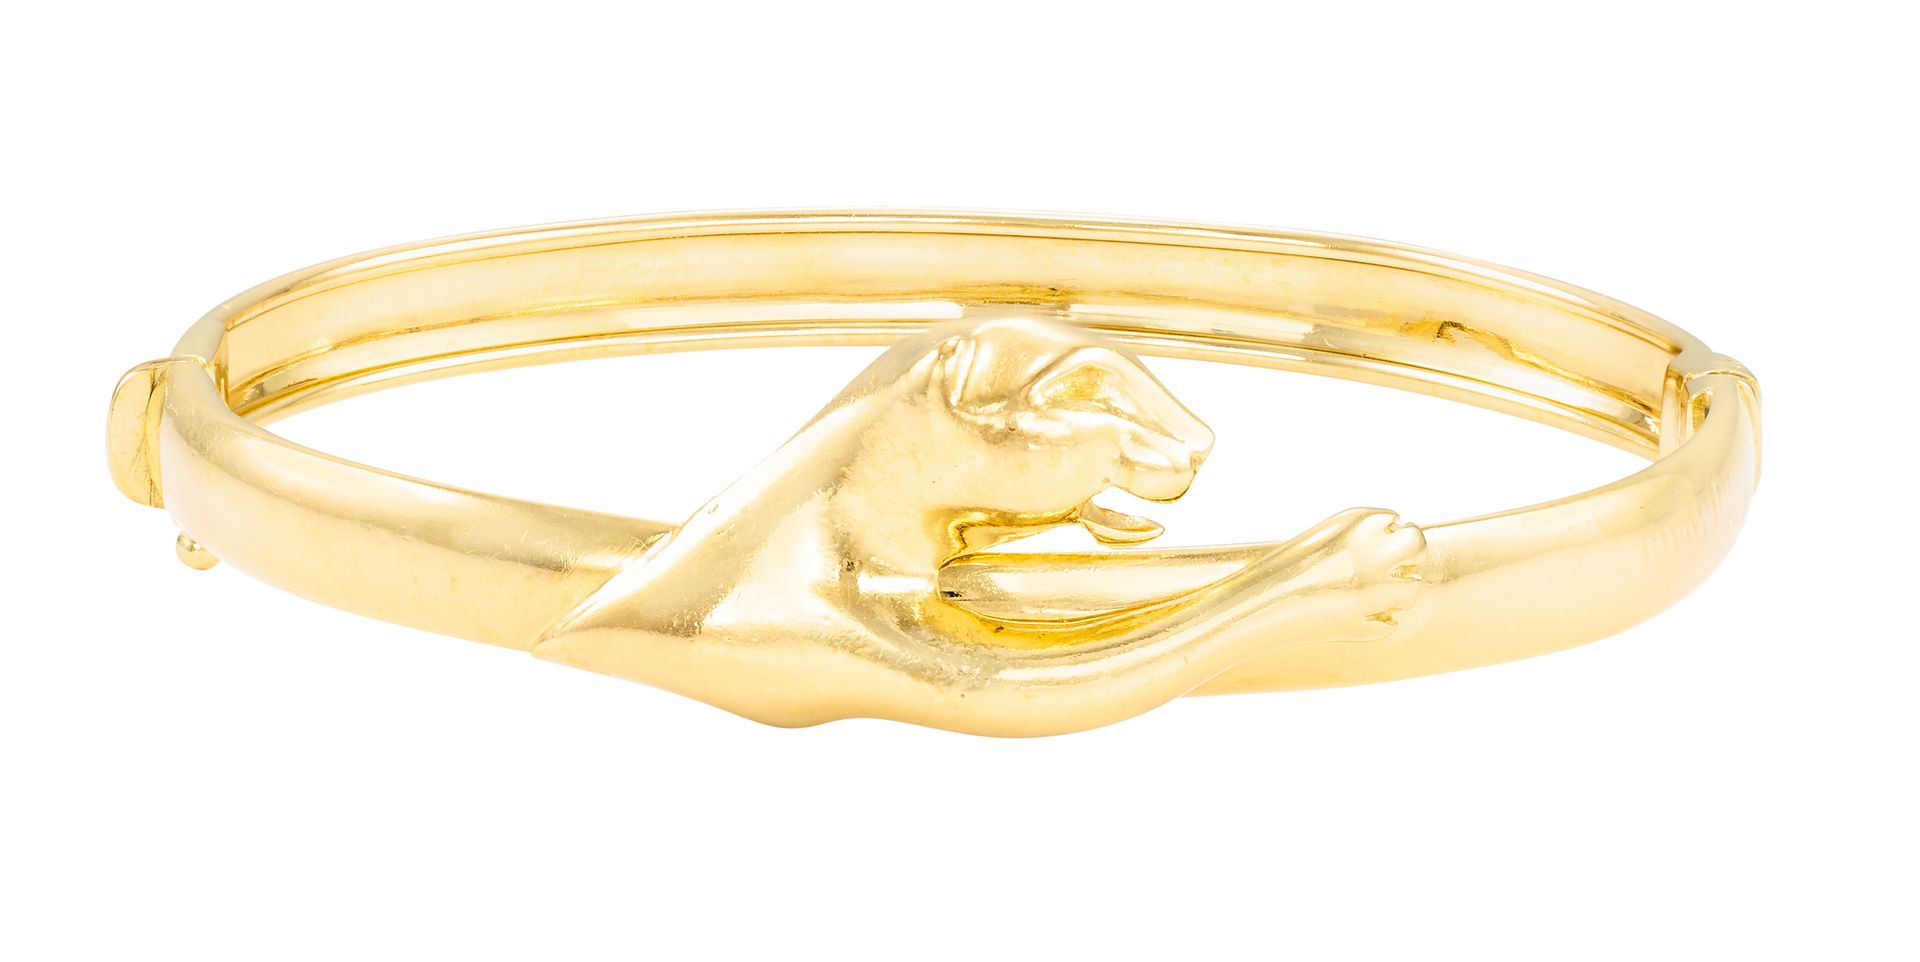 Bracelet "Panthère" in yellow gold with side opening
Diameter: 5.7 cm 
Pb: 15.10&hellip;